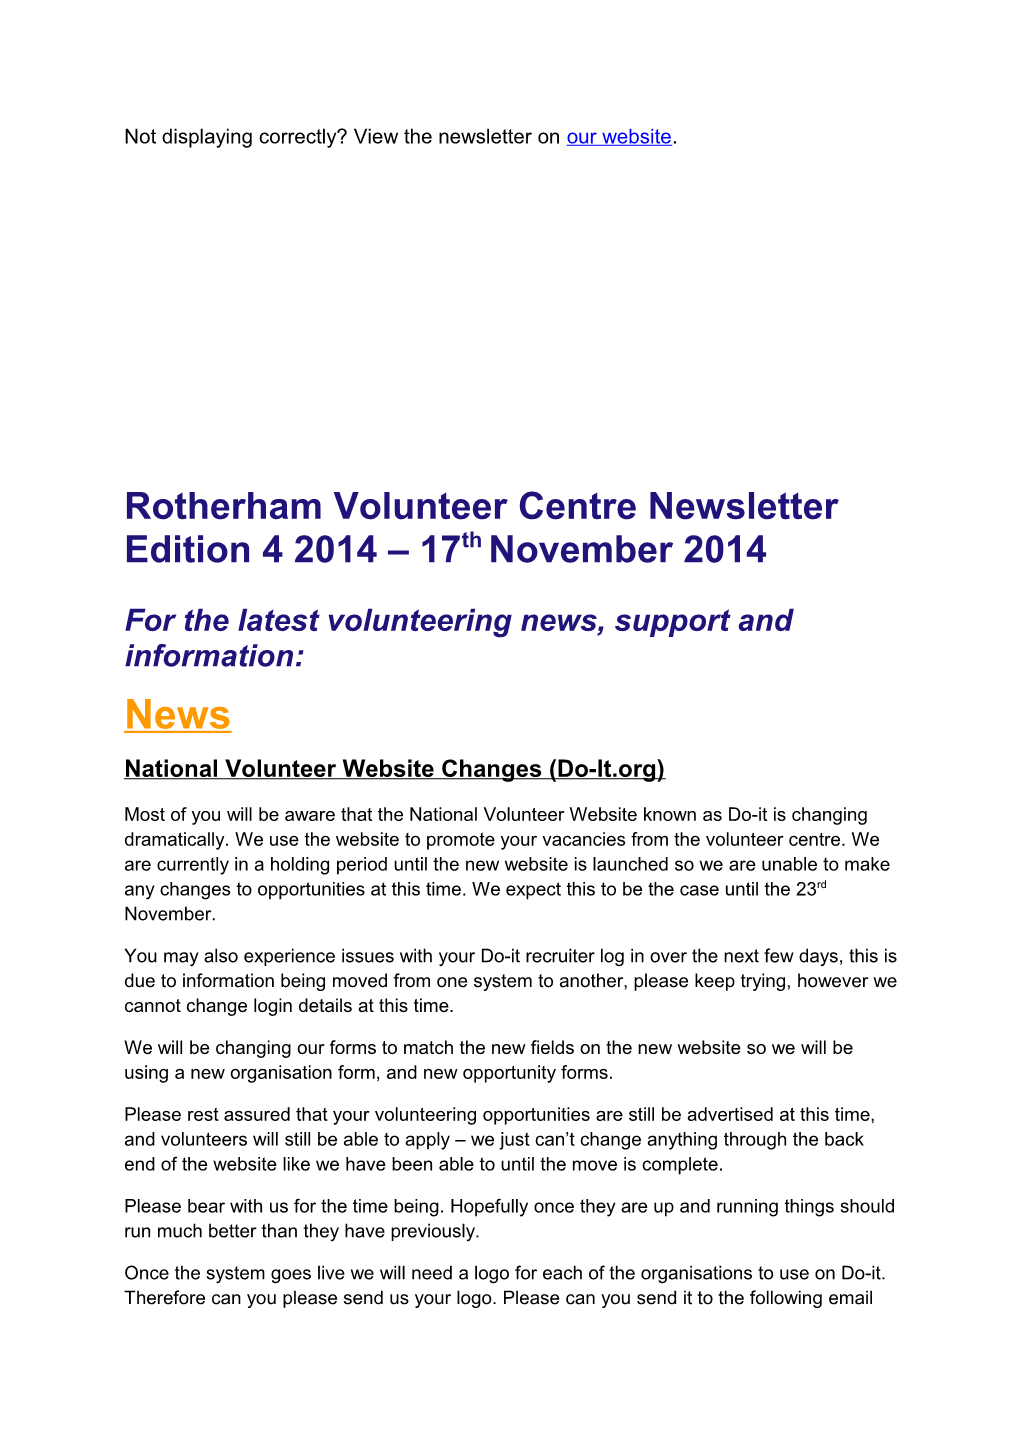 For the Latest Volunteering News, Support and Information